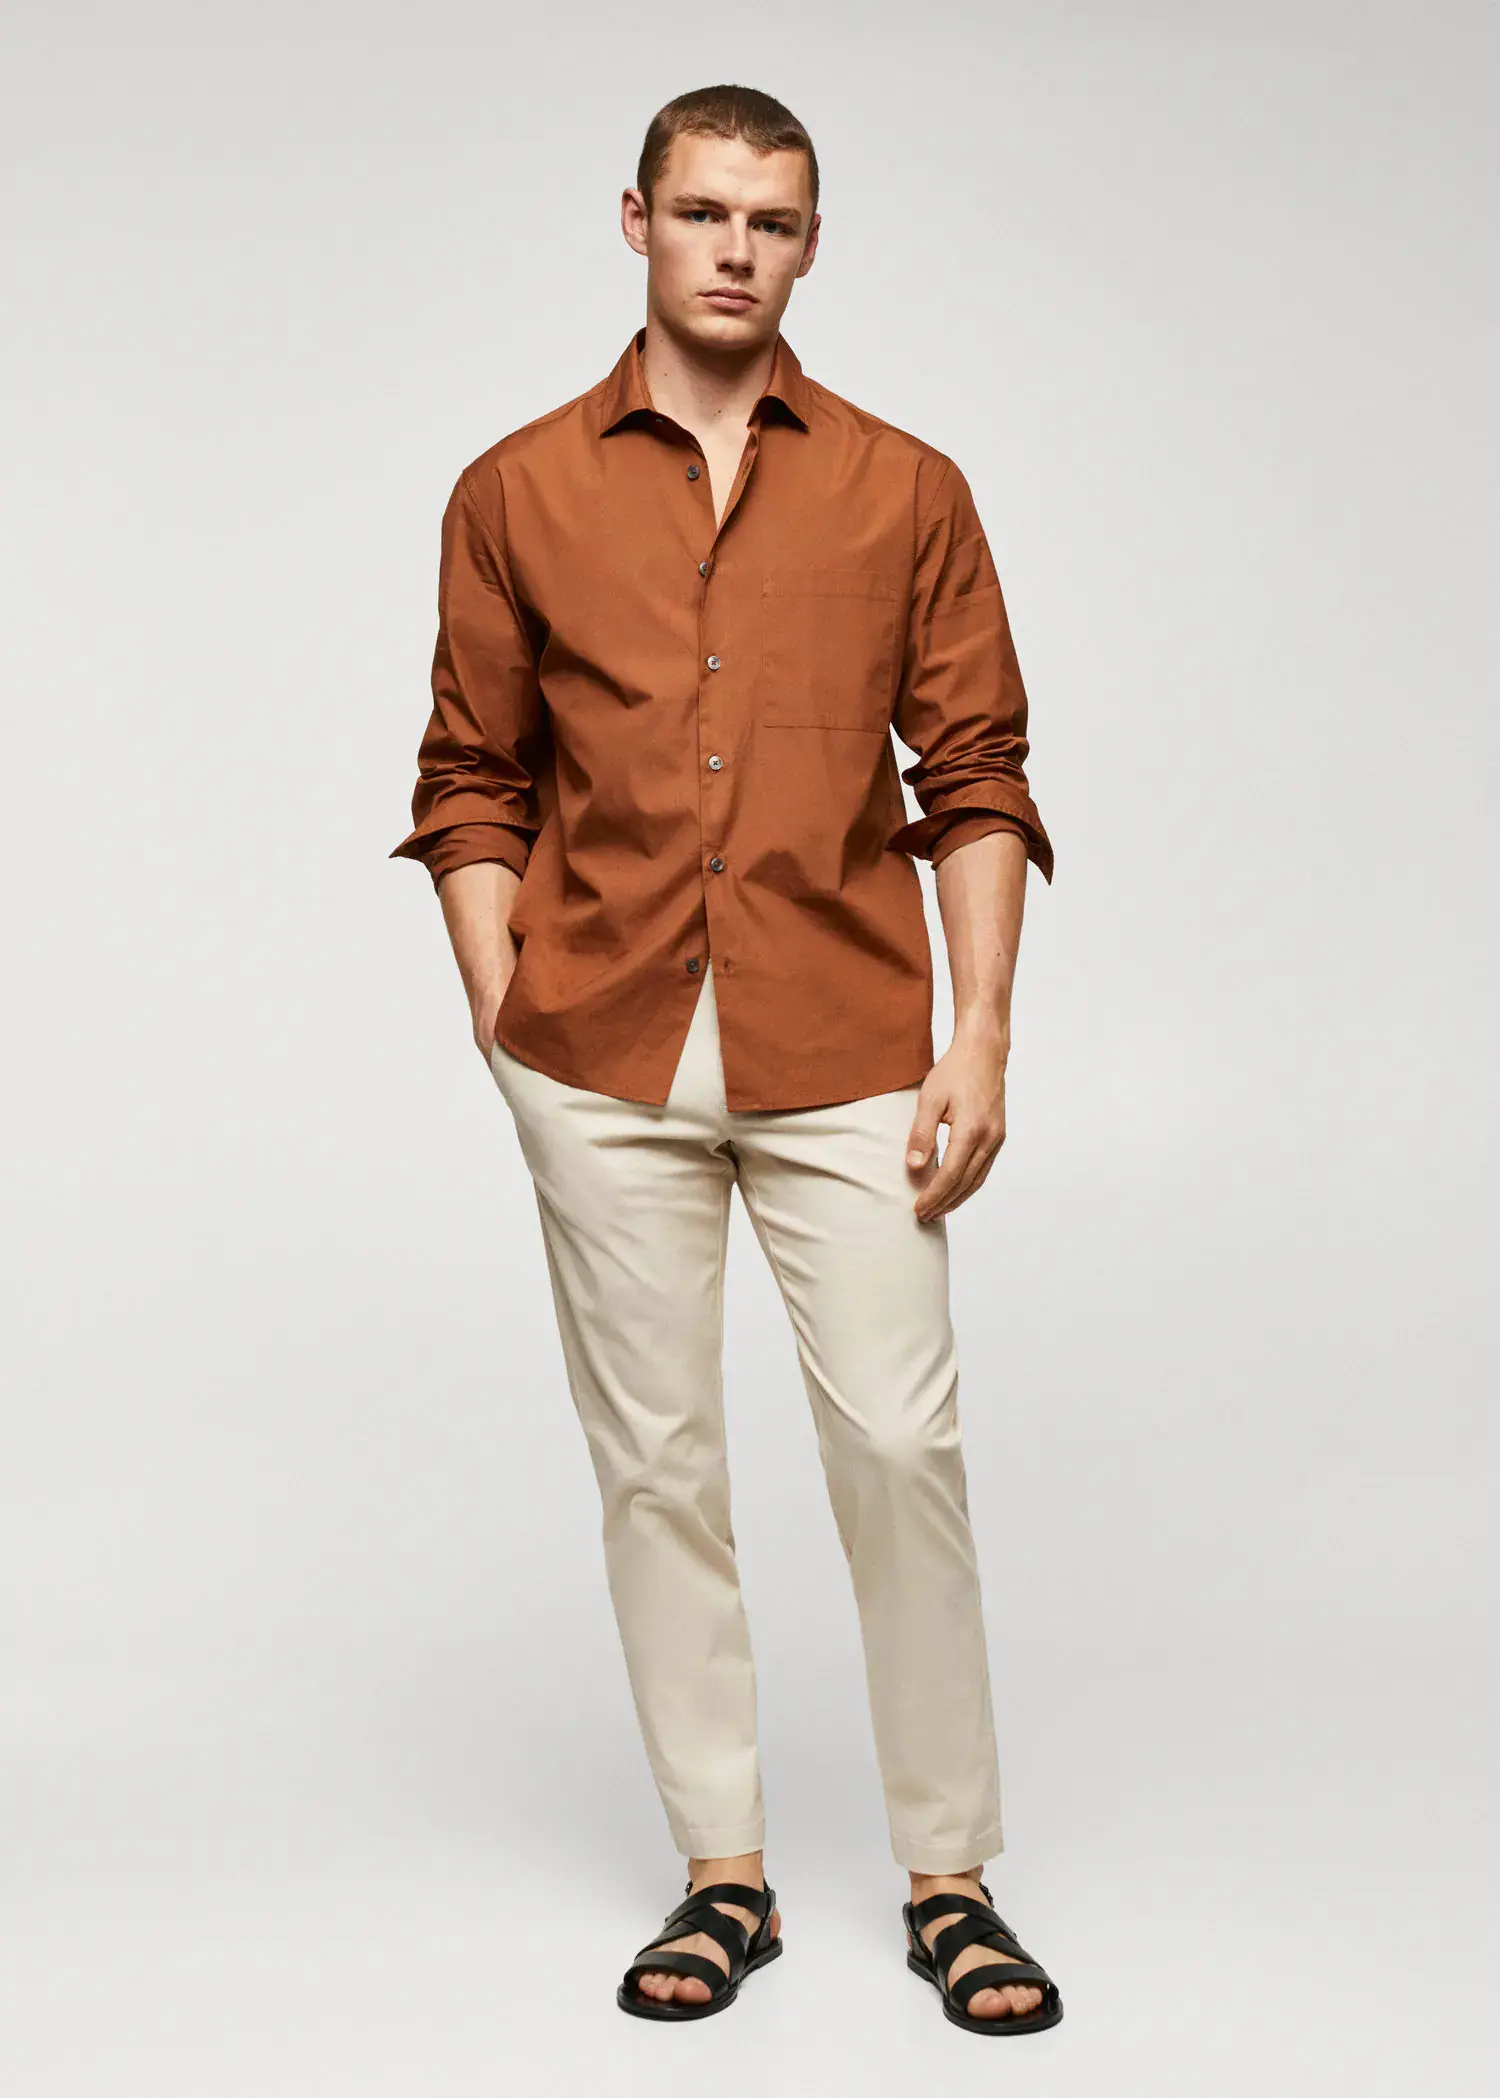 Mango Cotton tapered crop pants. a man wearing a brown shirt and white pants. 